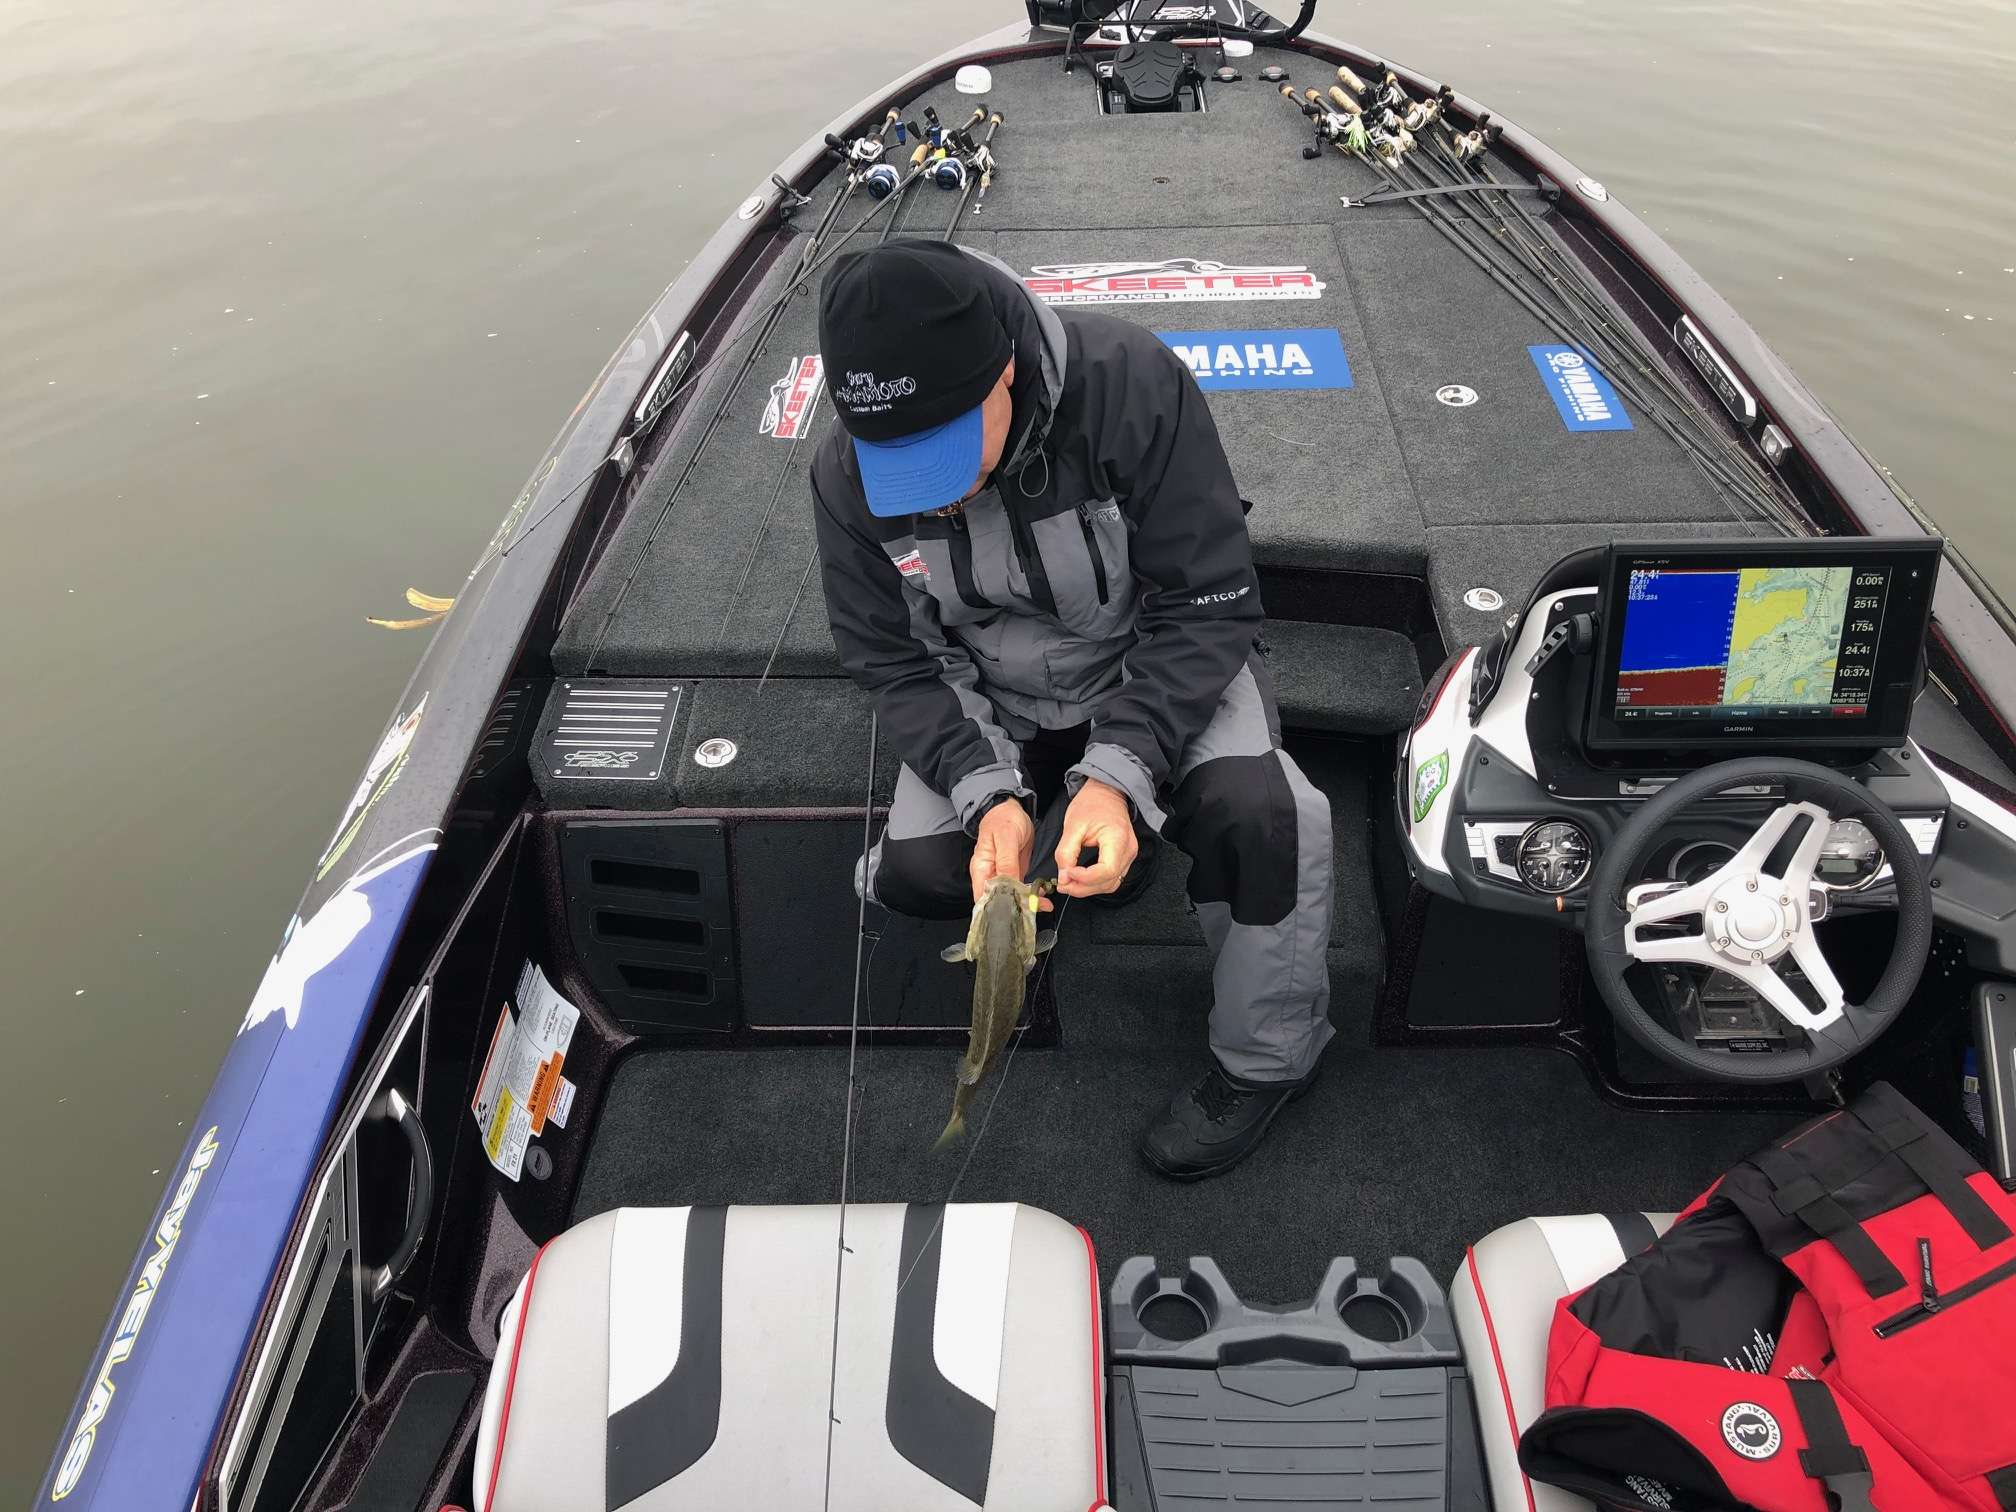 With #5 in the boat, Jay Yelas has filled out his limit and knows its time to begin to upgrade his catch now. The Skeeter Livewell has 5 Lake Lanier spots in it. 

We had a couple of spectator boats pull up just now, stay a minute, and leave. 

âThey pull up and check BASSTrakk,â said Yelas. âIf youâre not leading or up near the top, they take off and leave. They want to find the leaders.â 